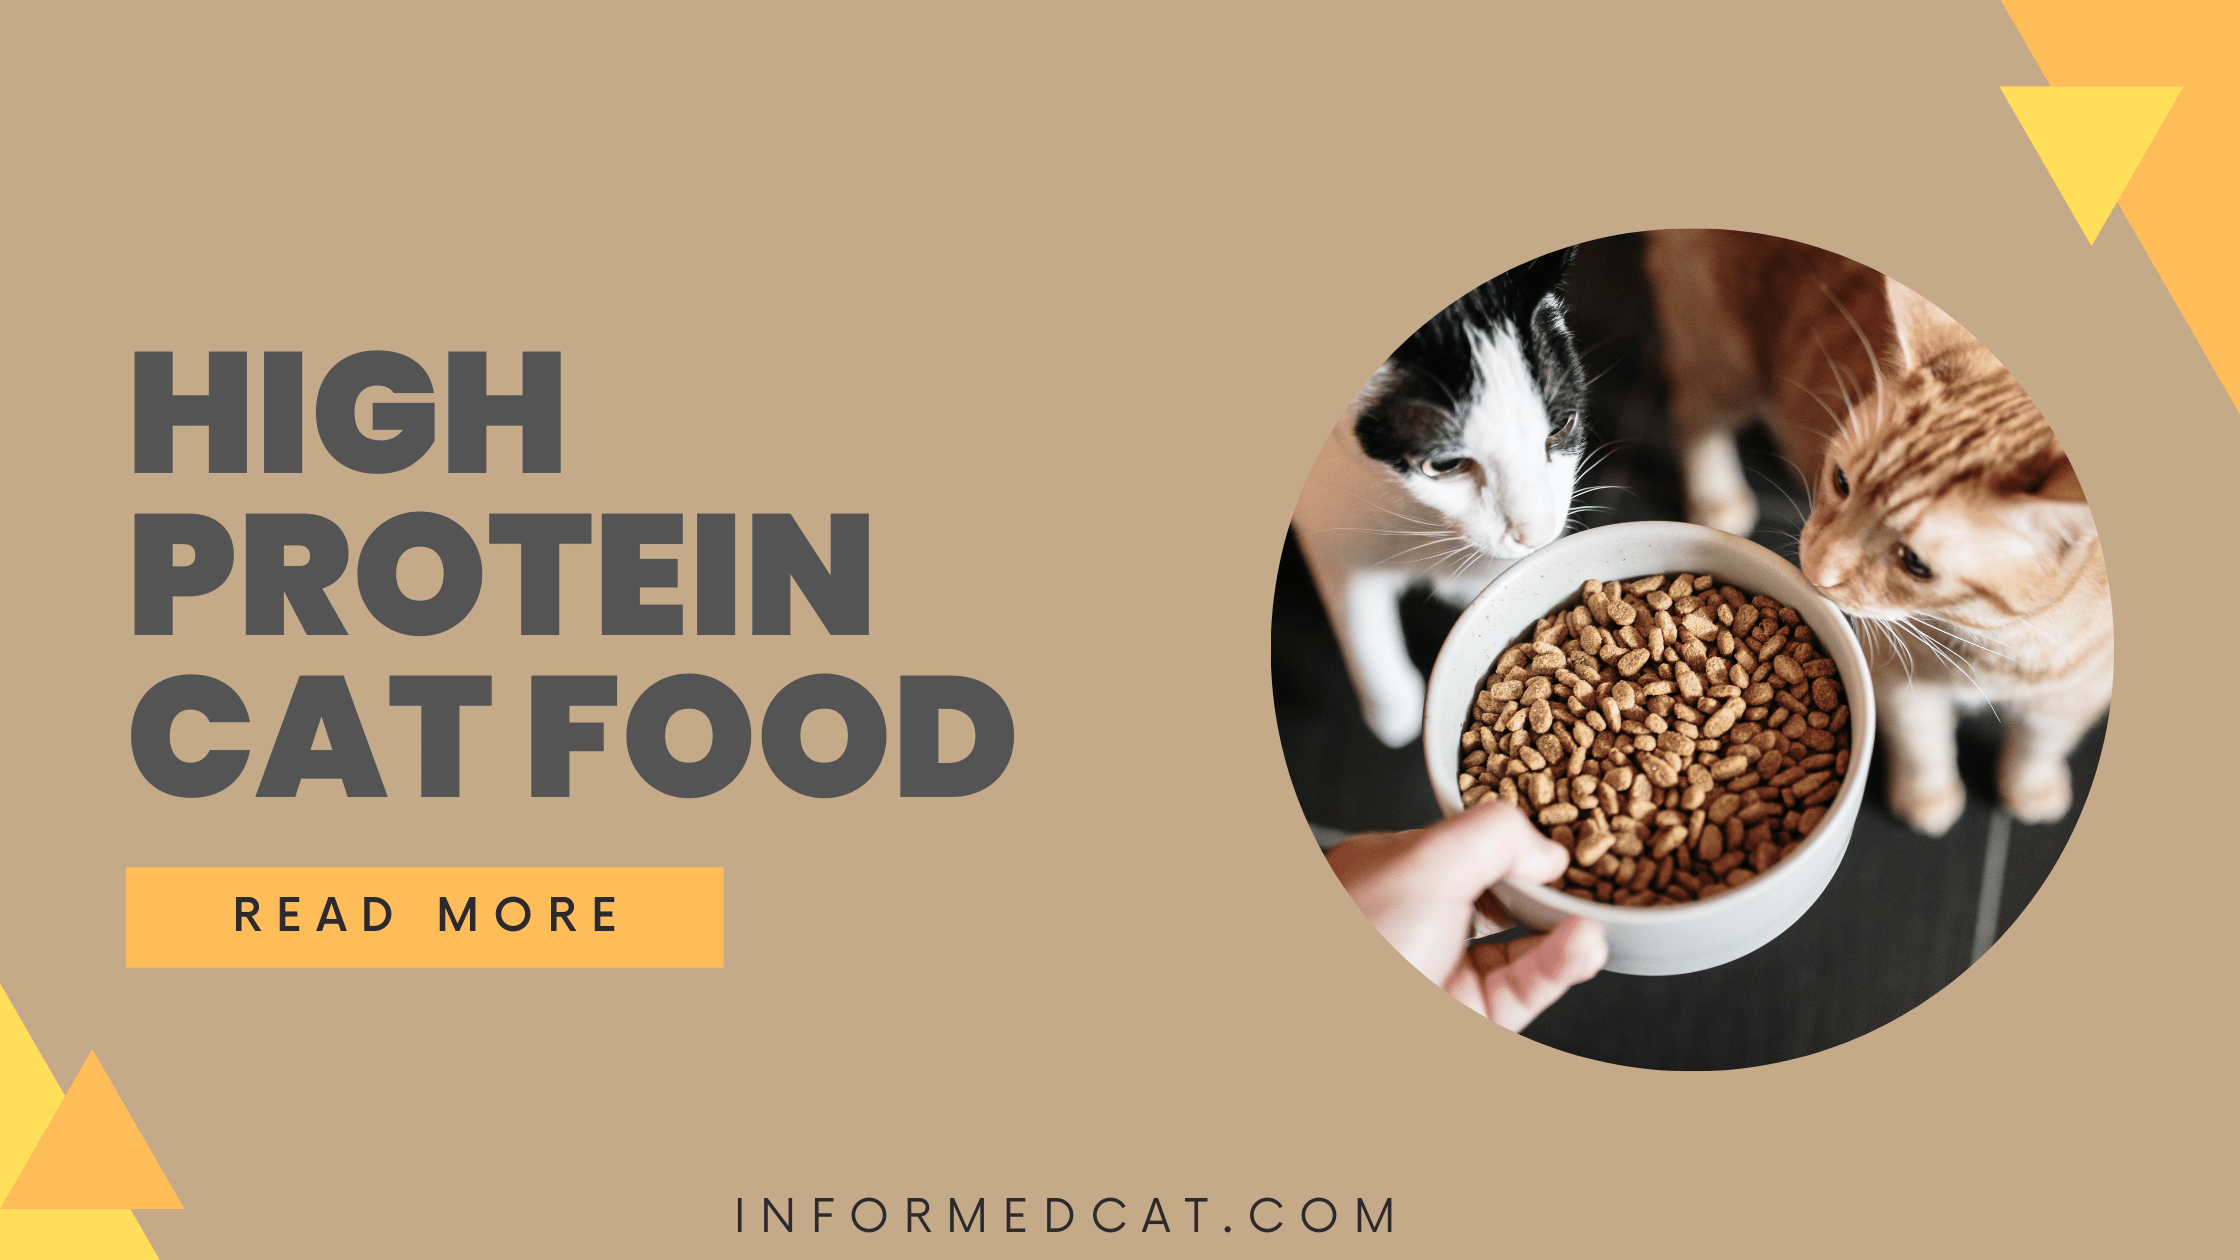 The benefits of switching to a high protein cat food